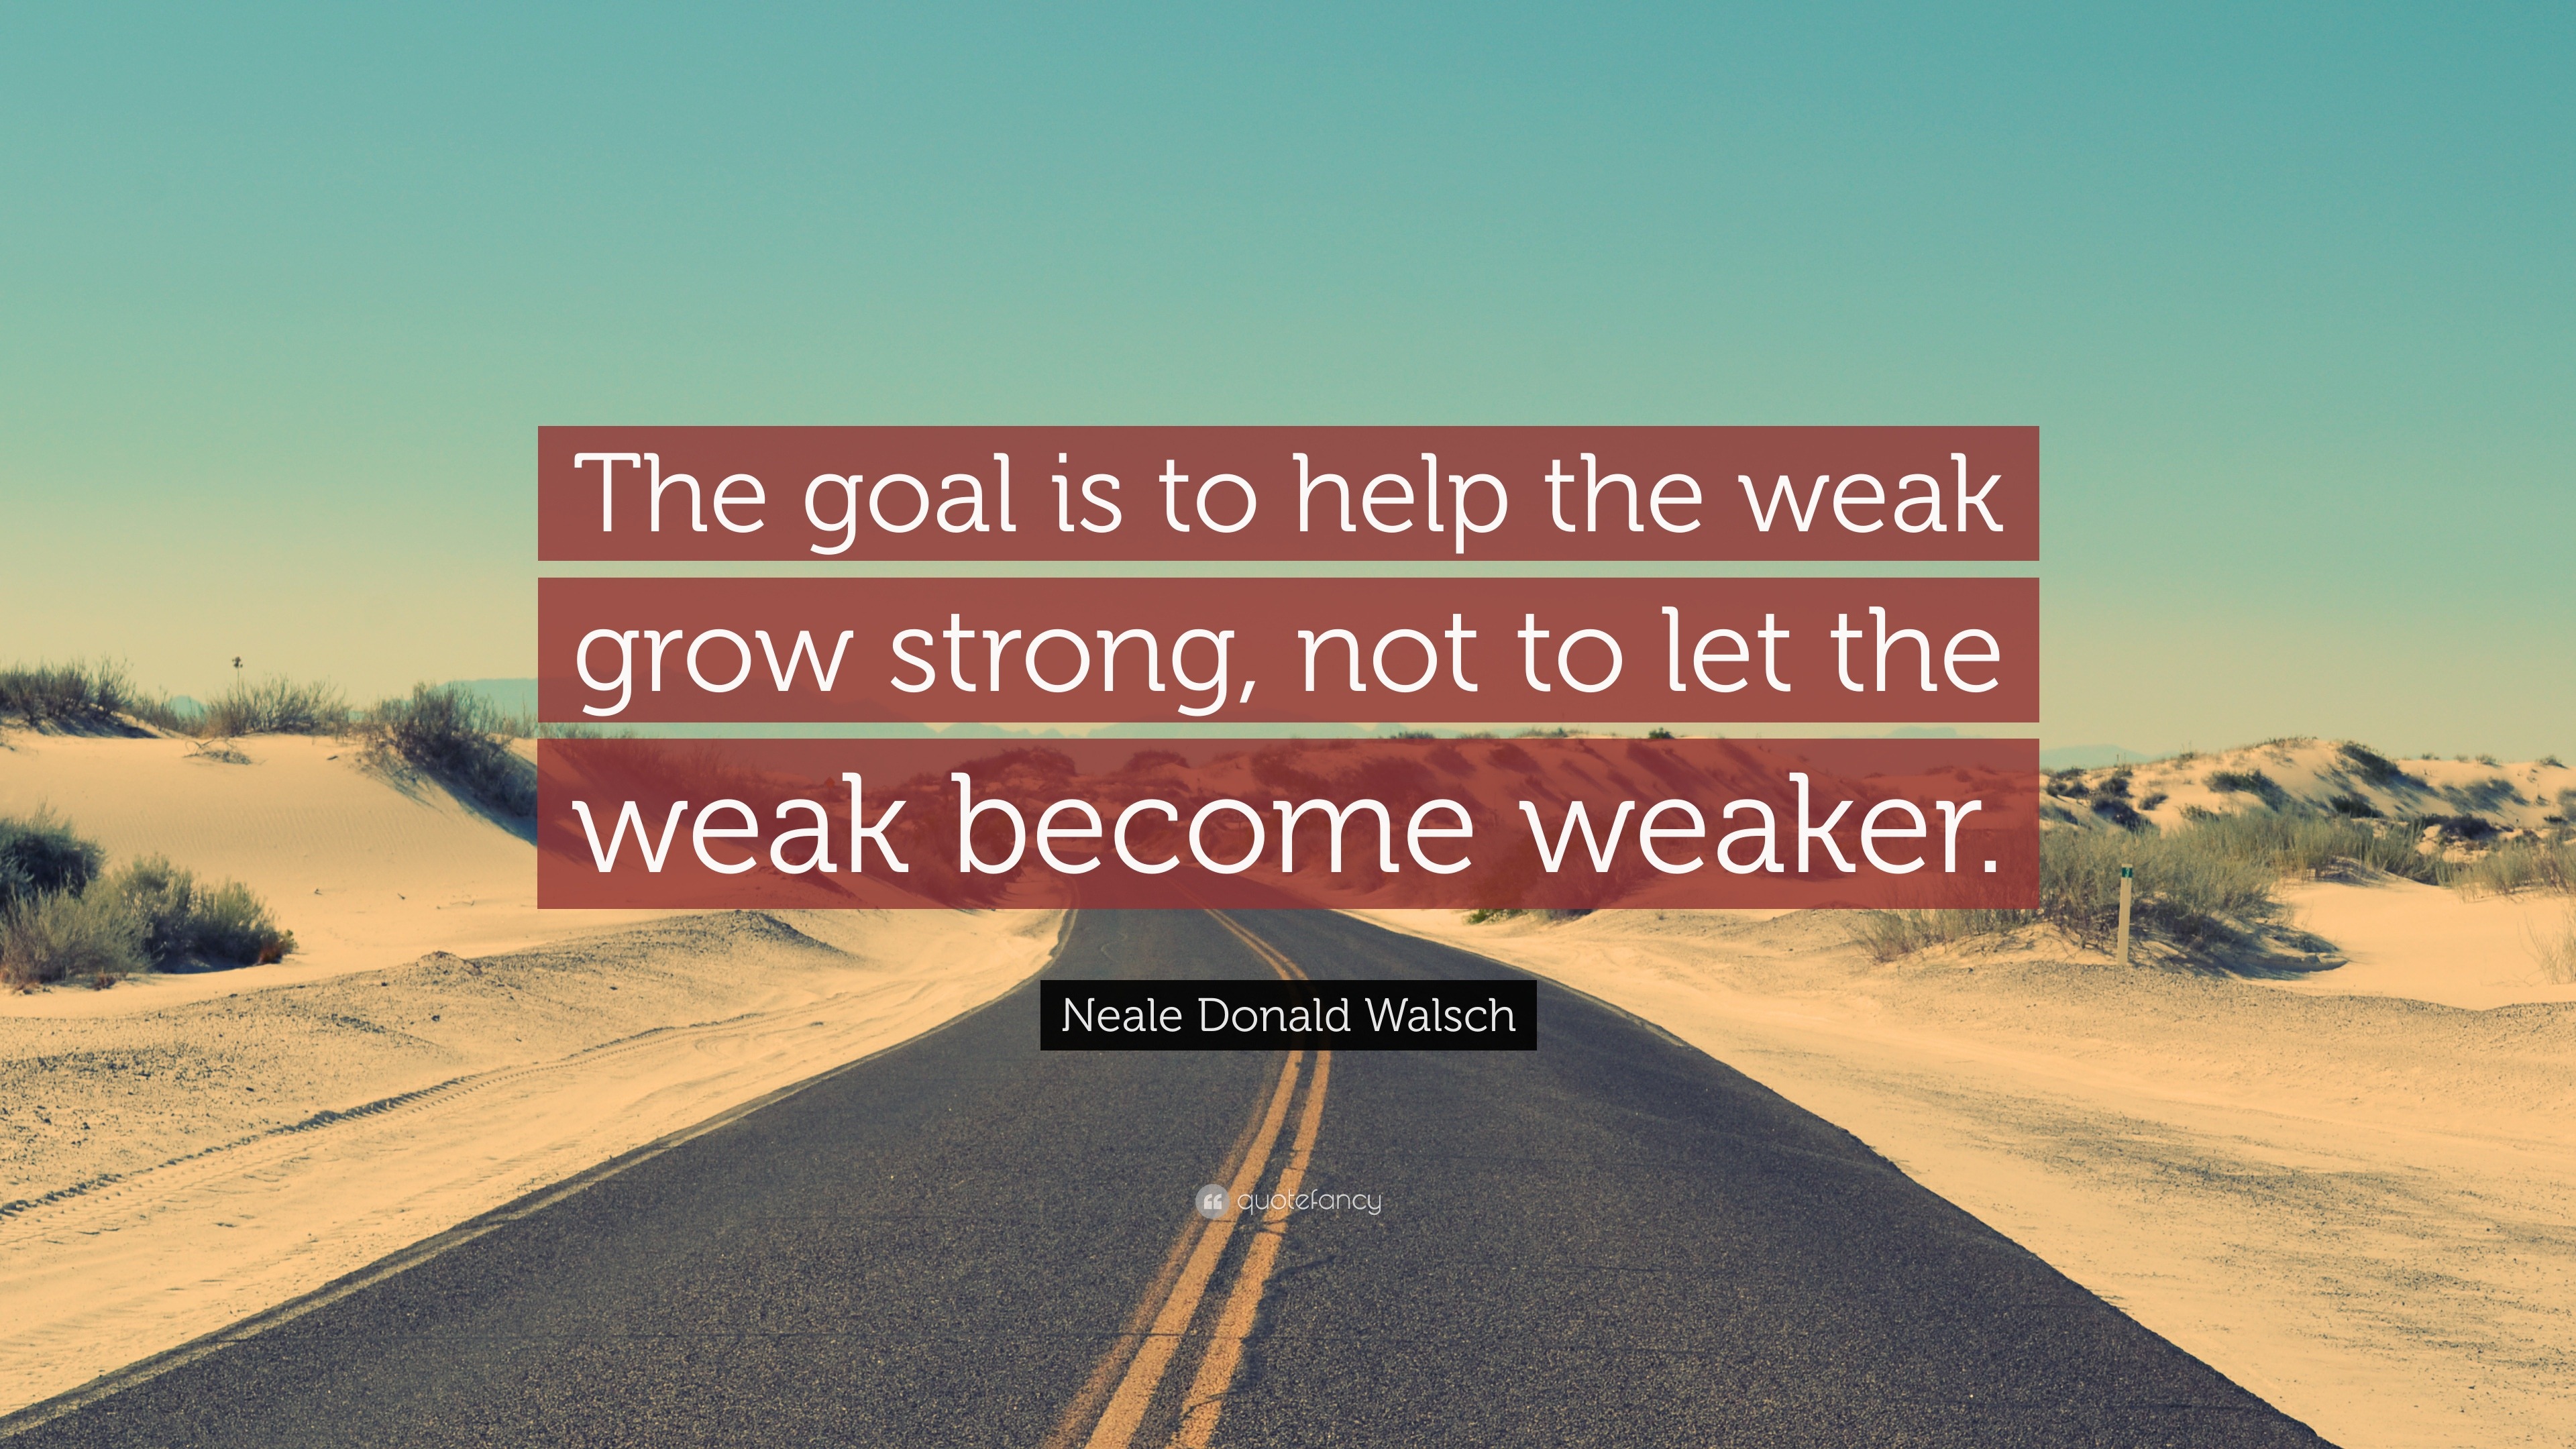 Neale Donald Walsch Quote: “The goal is to help the weak grow strong ...